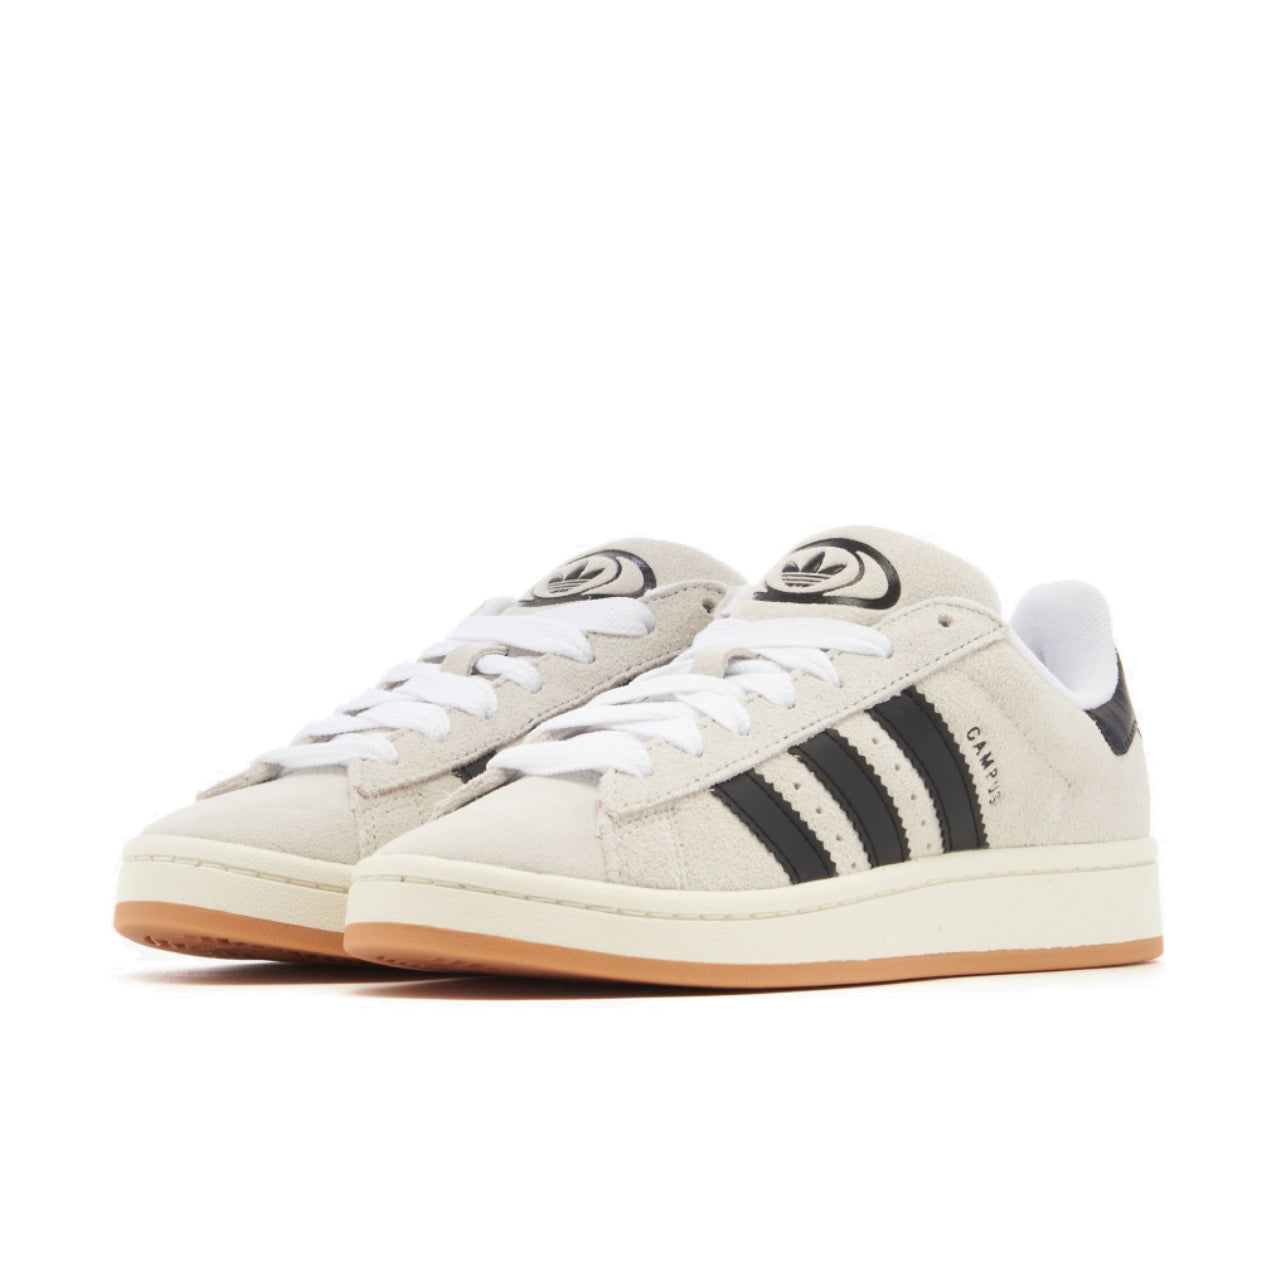 adidas Campus 00s Crystal White Core Black - GY0042 - Medial